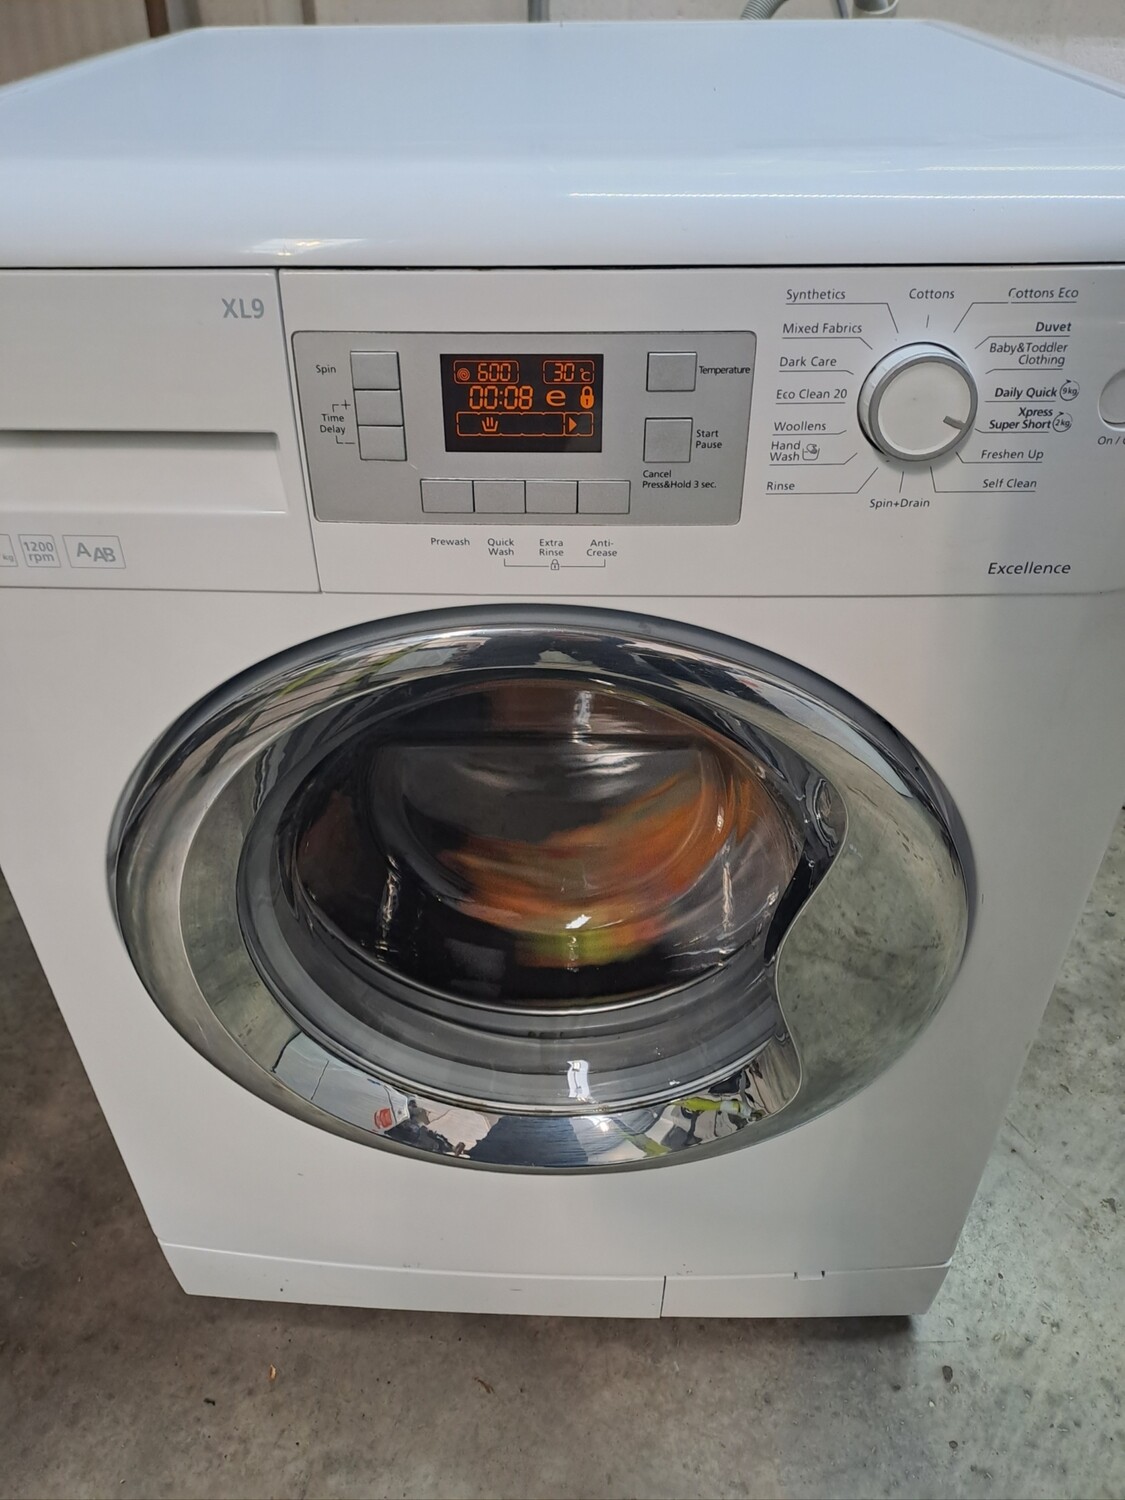 Beko WMB91242LC 9kg Load 1200 Spin Washing Machine - White - Refurbished - 6 Month Guarantee. This item is located at our Whitby Road Shop